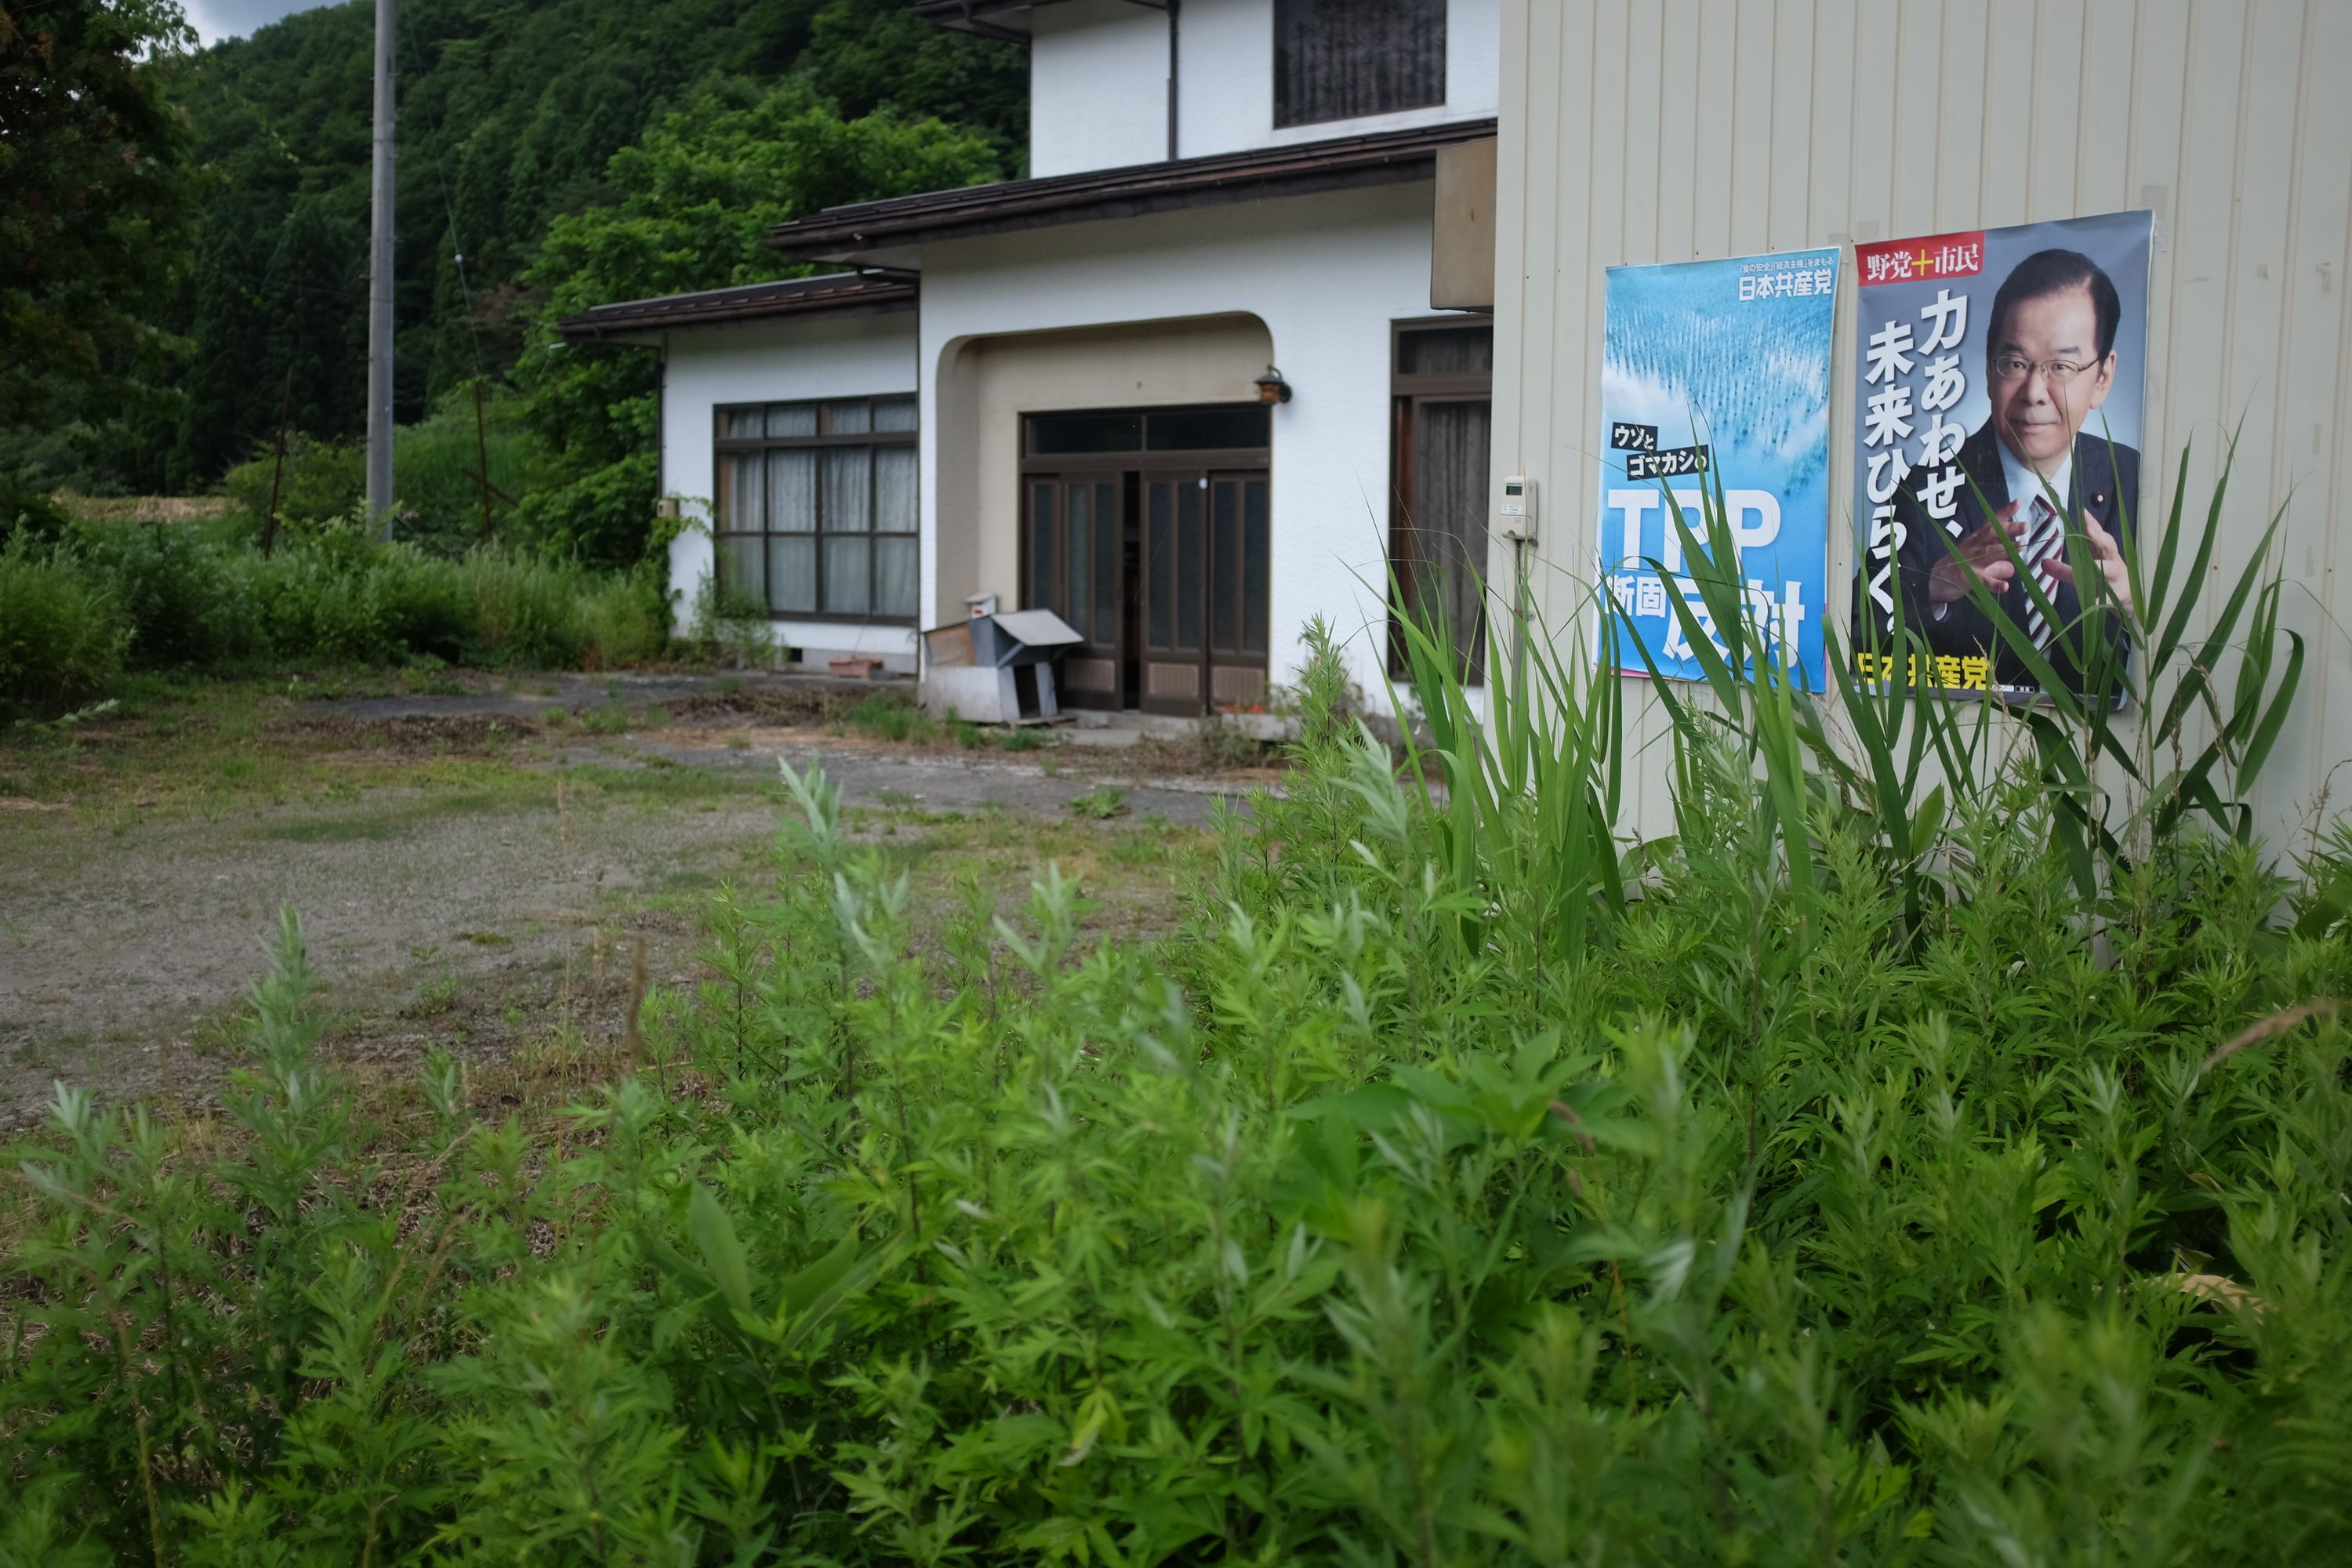 An abandoned-looking house with two political posters on its wall.